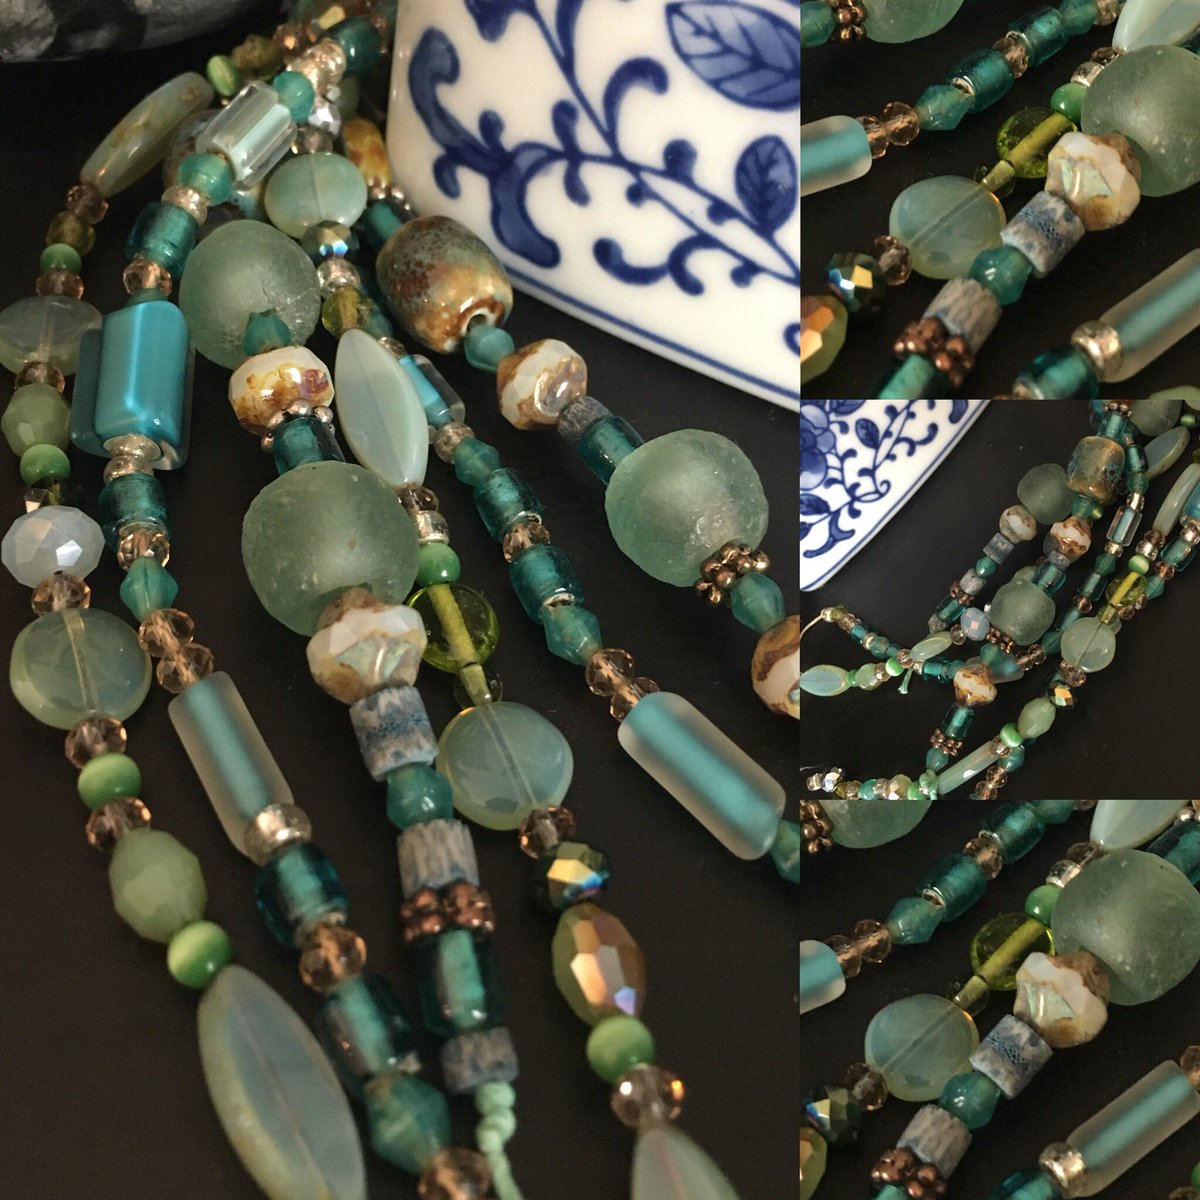 Vintage and new bead mix. Each strand is unique! #pressedglass #ghanabeads #coral #beads #beadshop #etsy #rusticbead